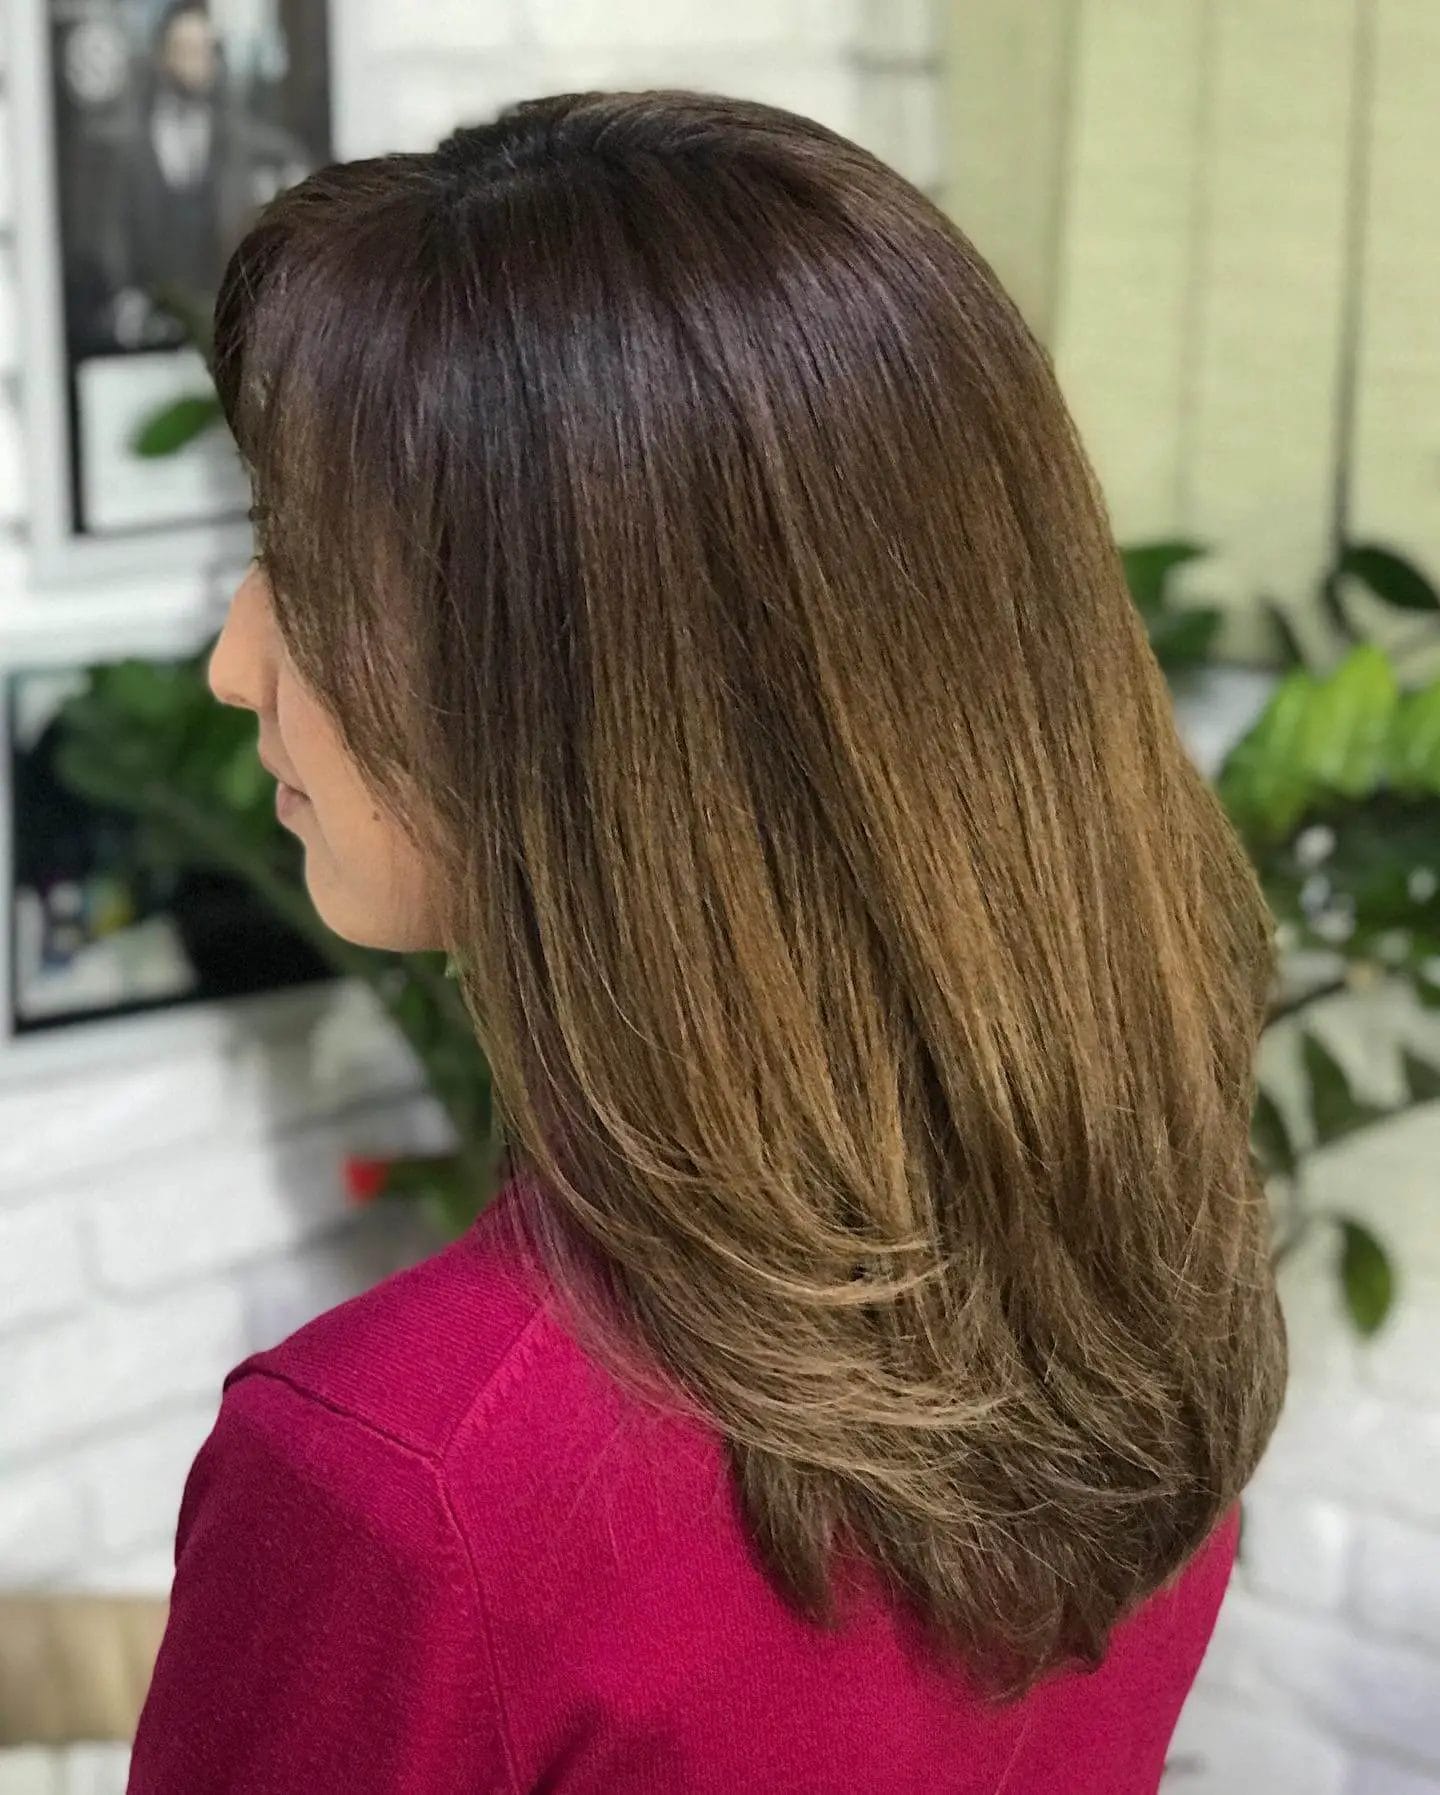 Mocha U-shaped cut highlighted with caramel tones and accented by playful layers.